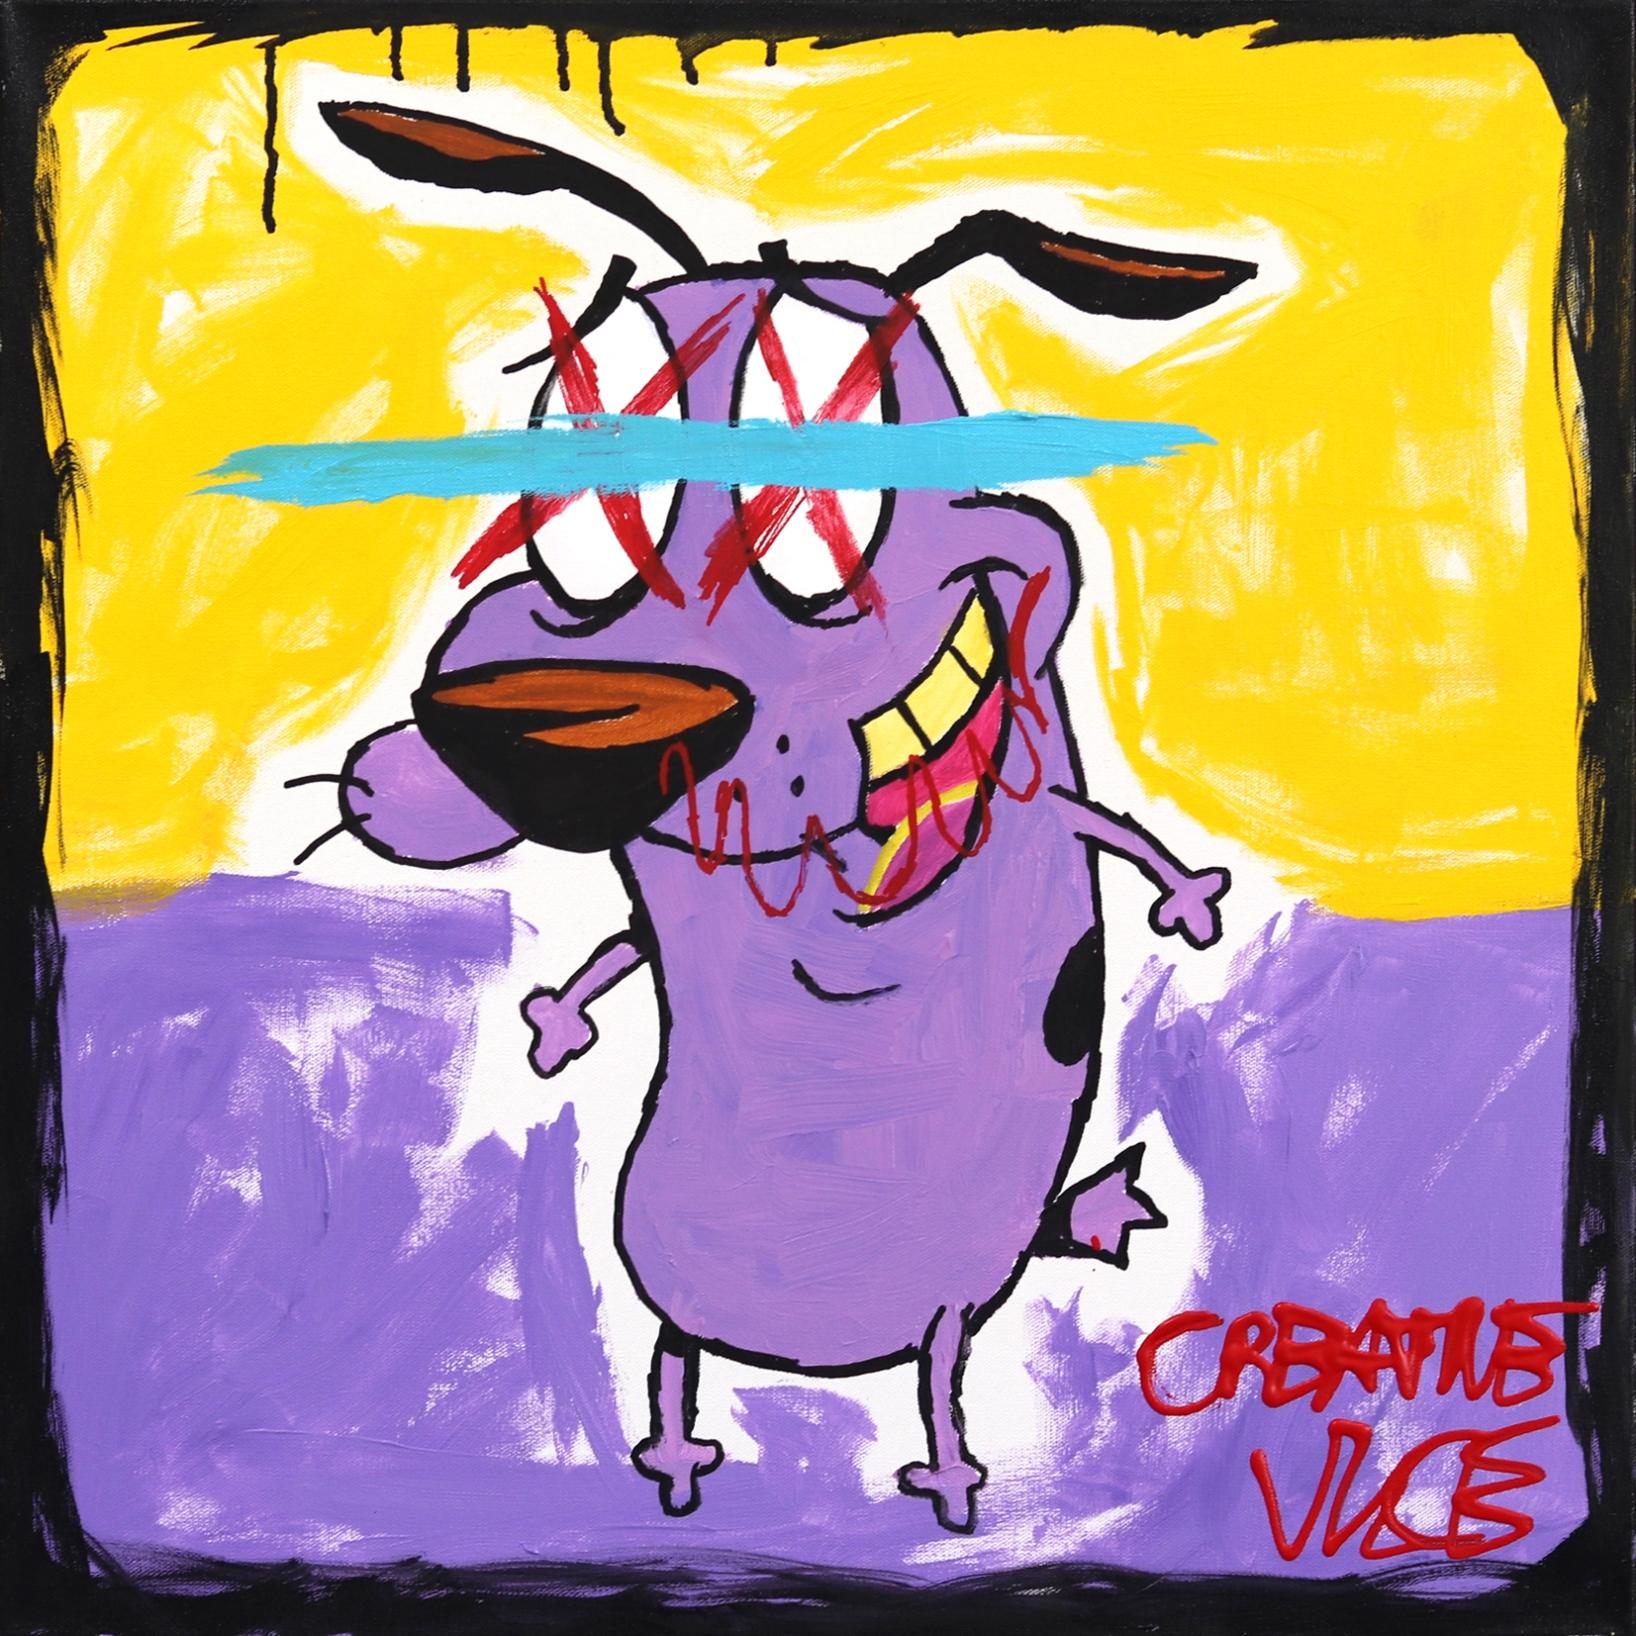 Randy Morales Figurative Painting - "STUPID DOG" Pop Art Cartoon Character inspired by Courage the Cowardly Dog